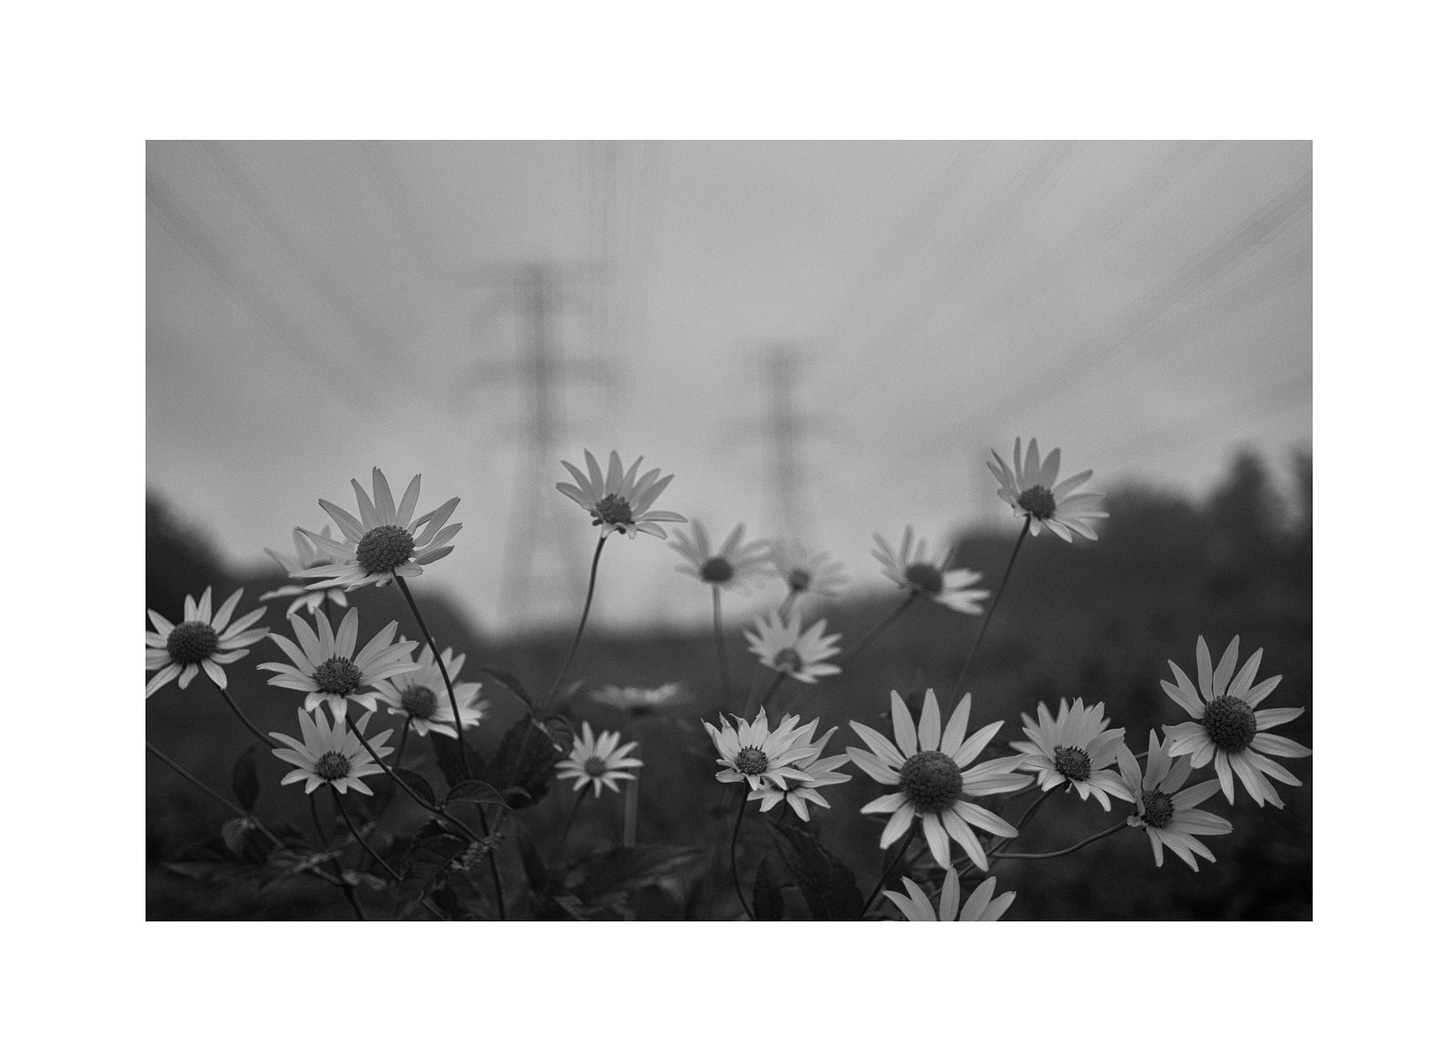 A black and white photo of flowers reaching up to the sky. Blurry, monstrous pylons loom behind.